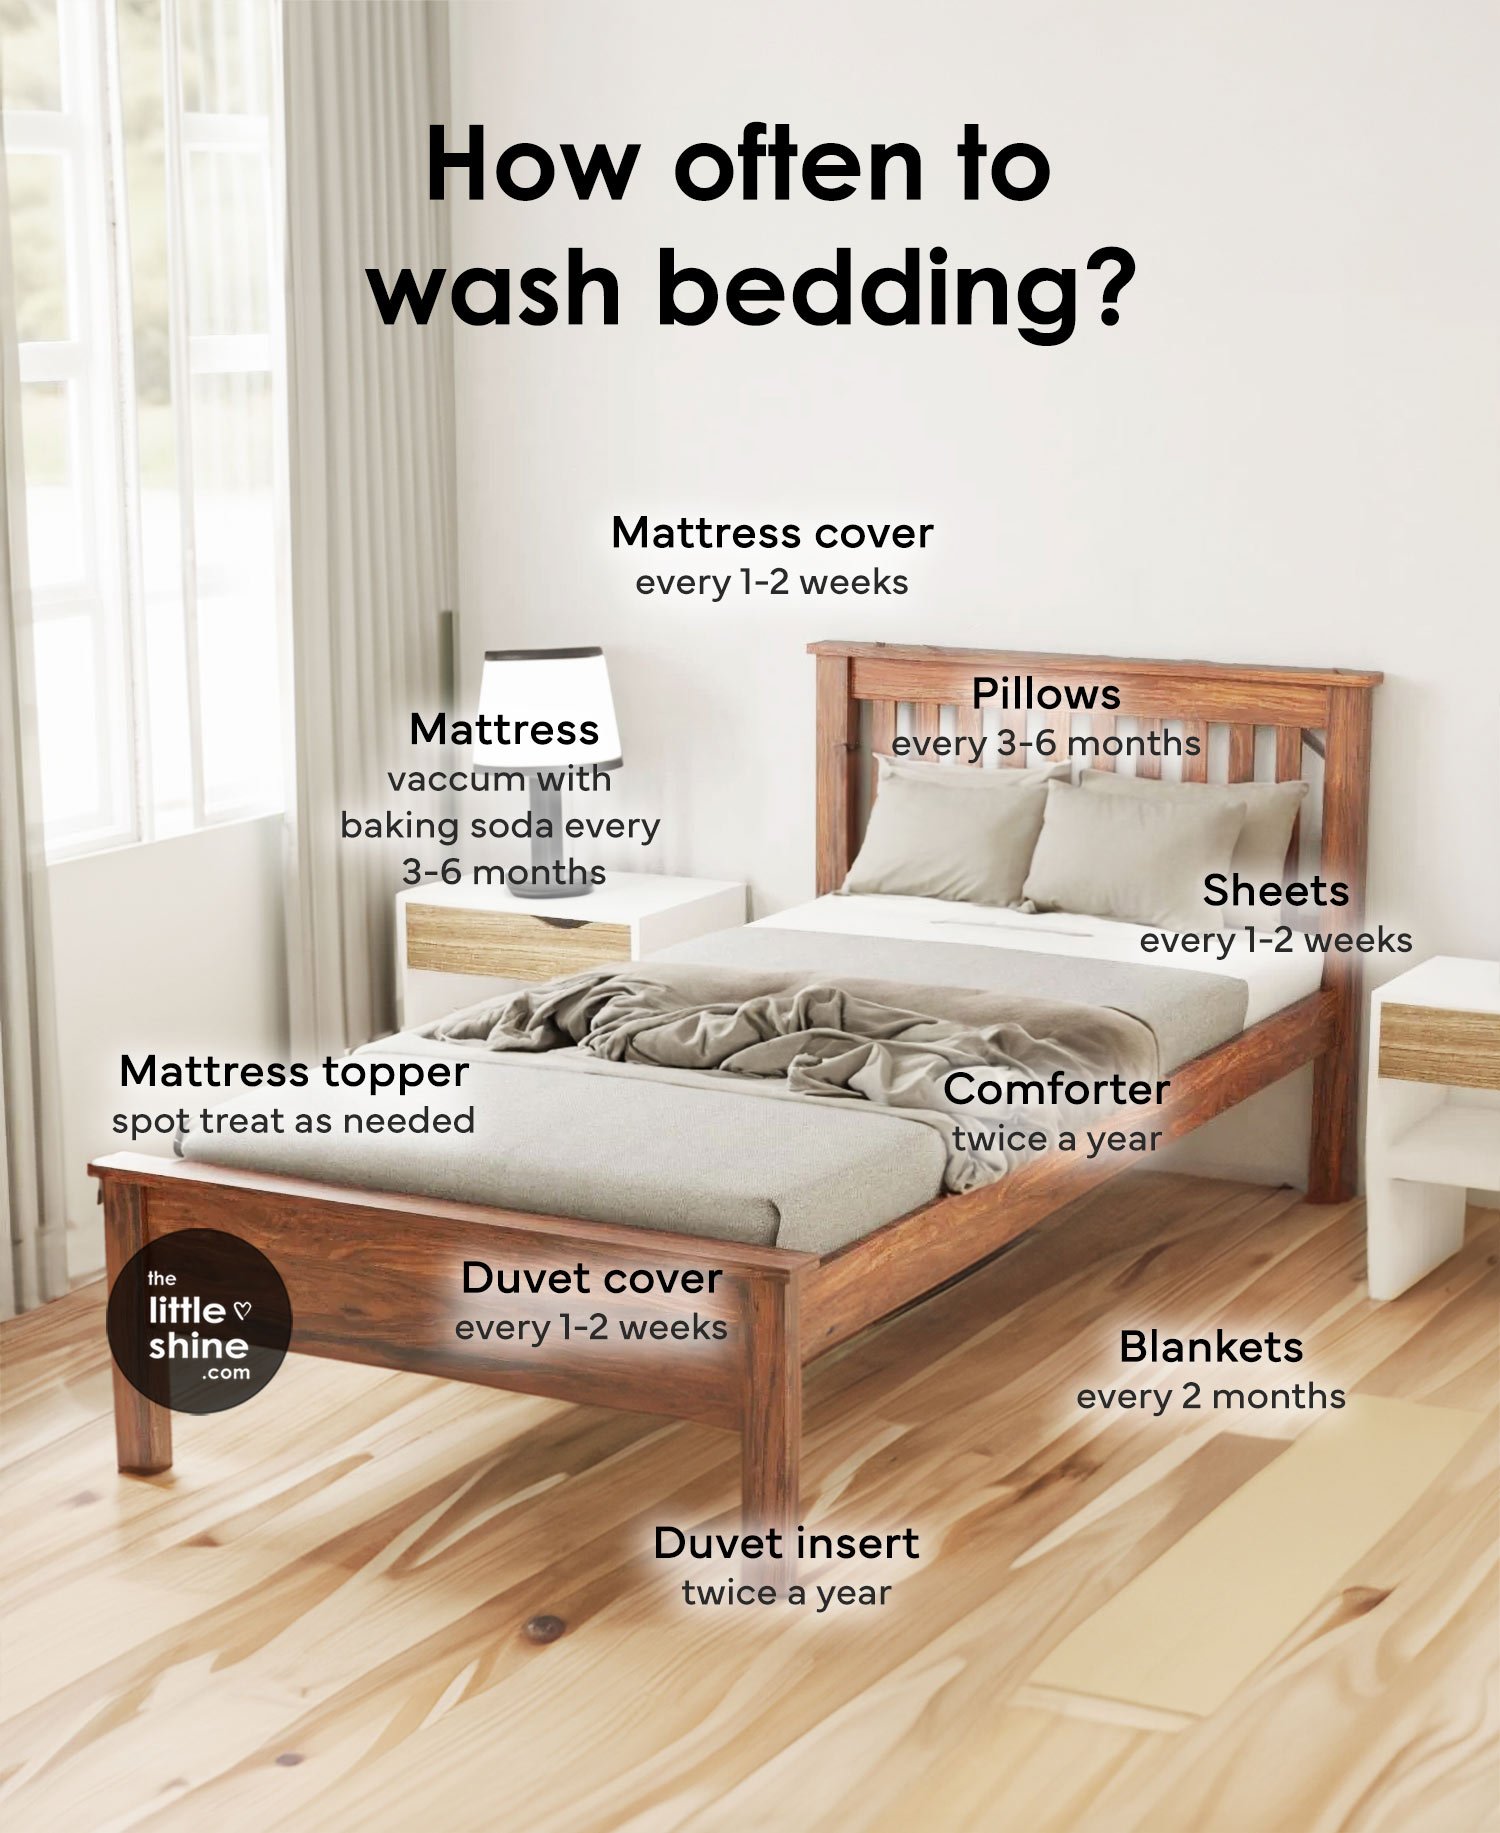 How Often to Wash Bedding?